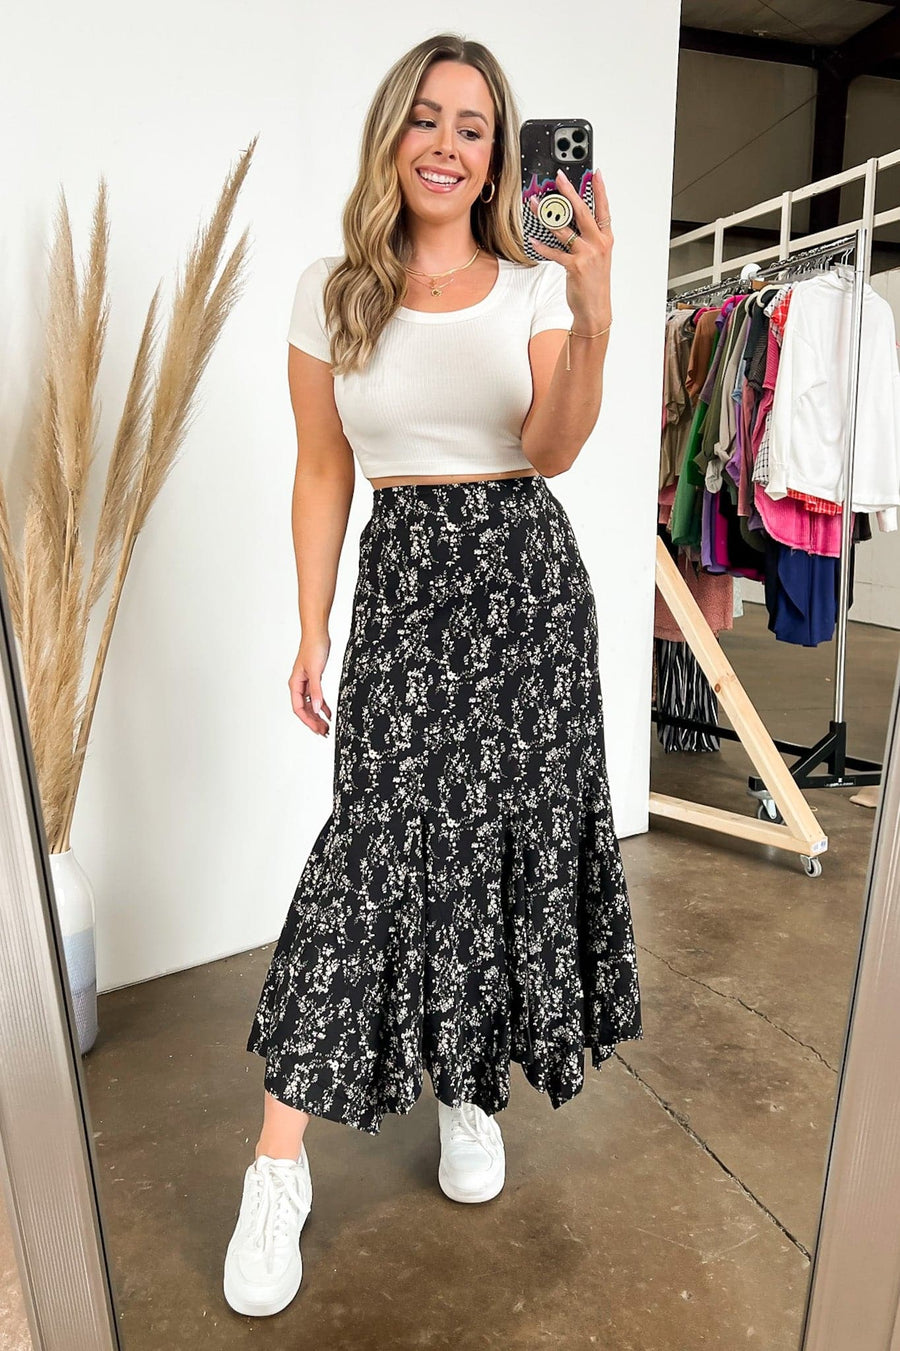  Buy Me Flowers Flowy Floral Ruffle Skirt - FINAL SALE - Madison and Mallory